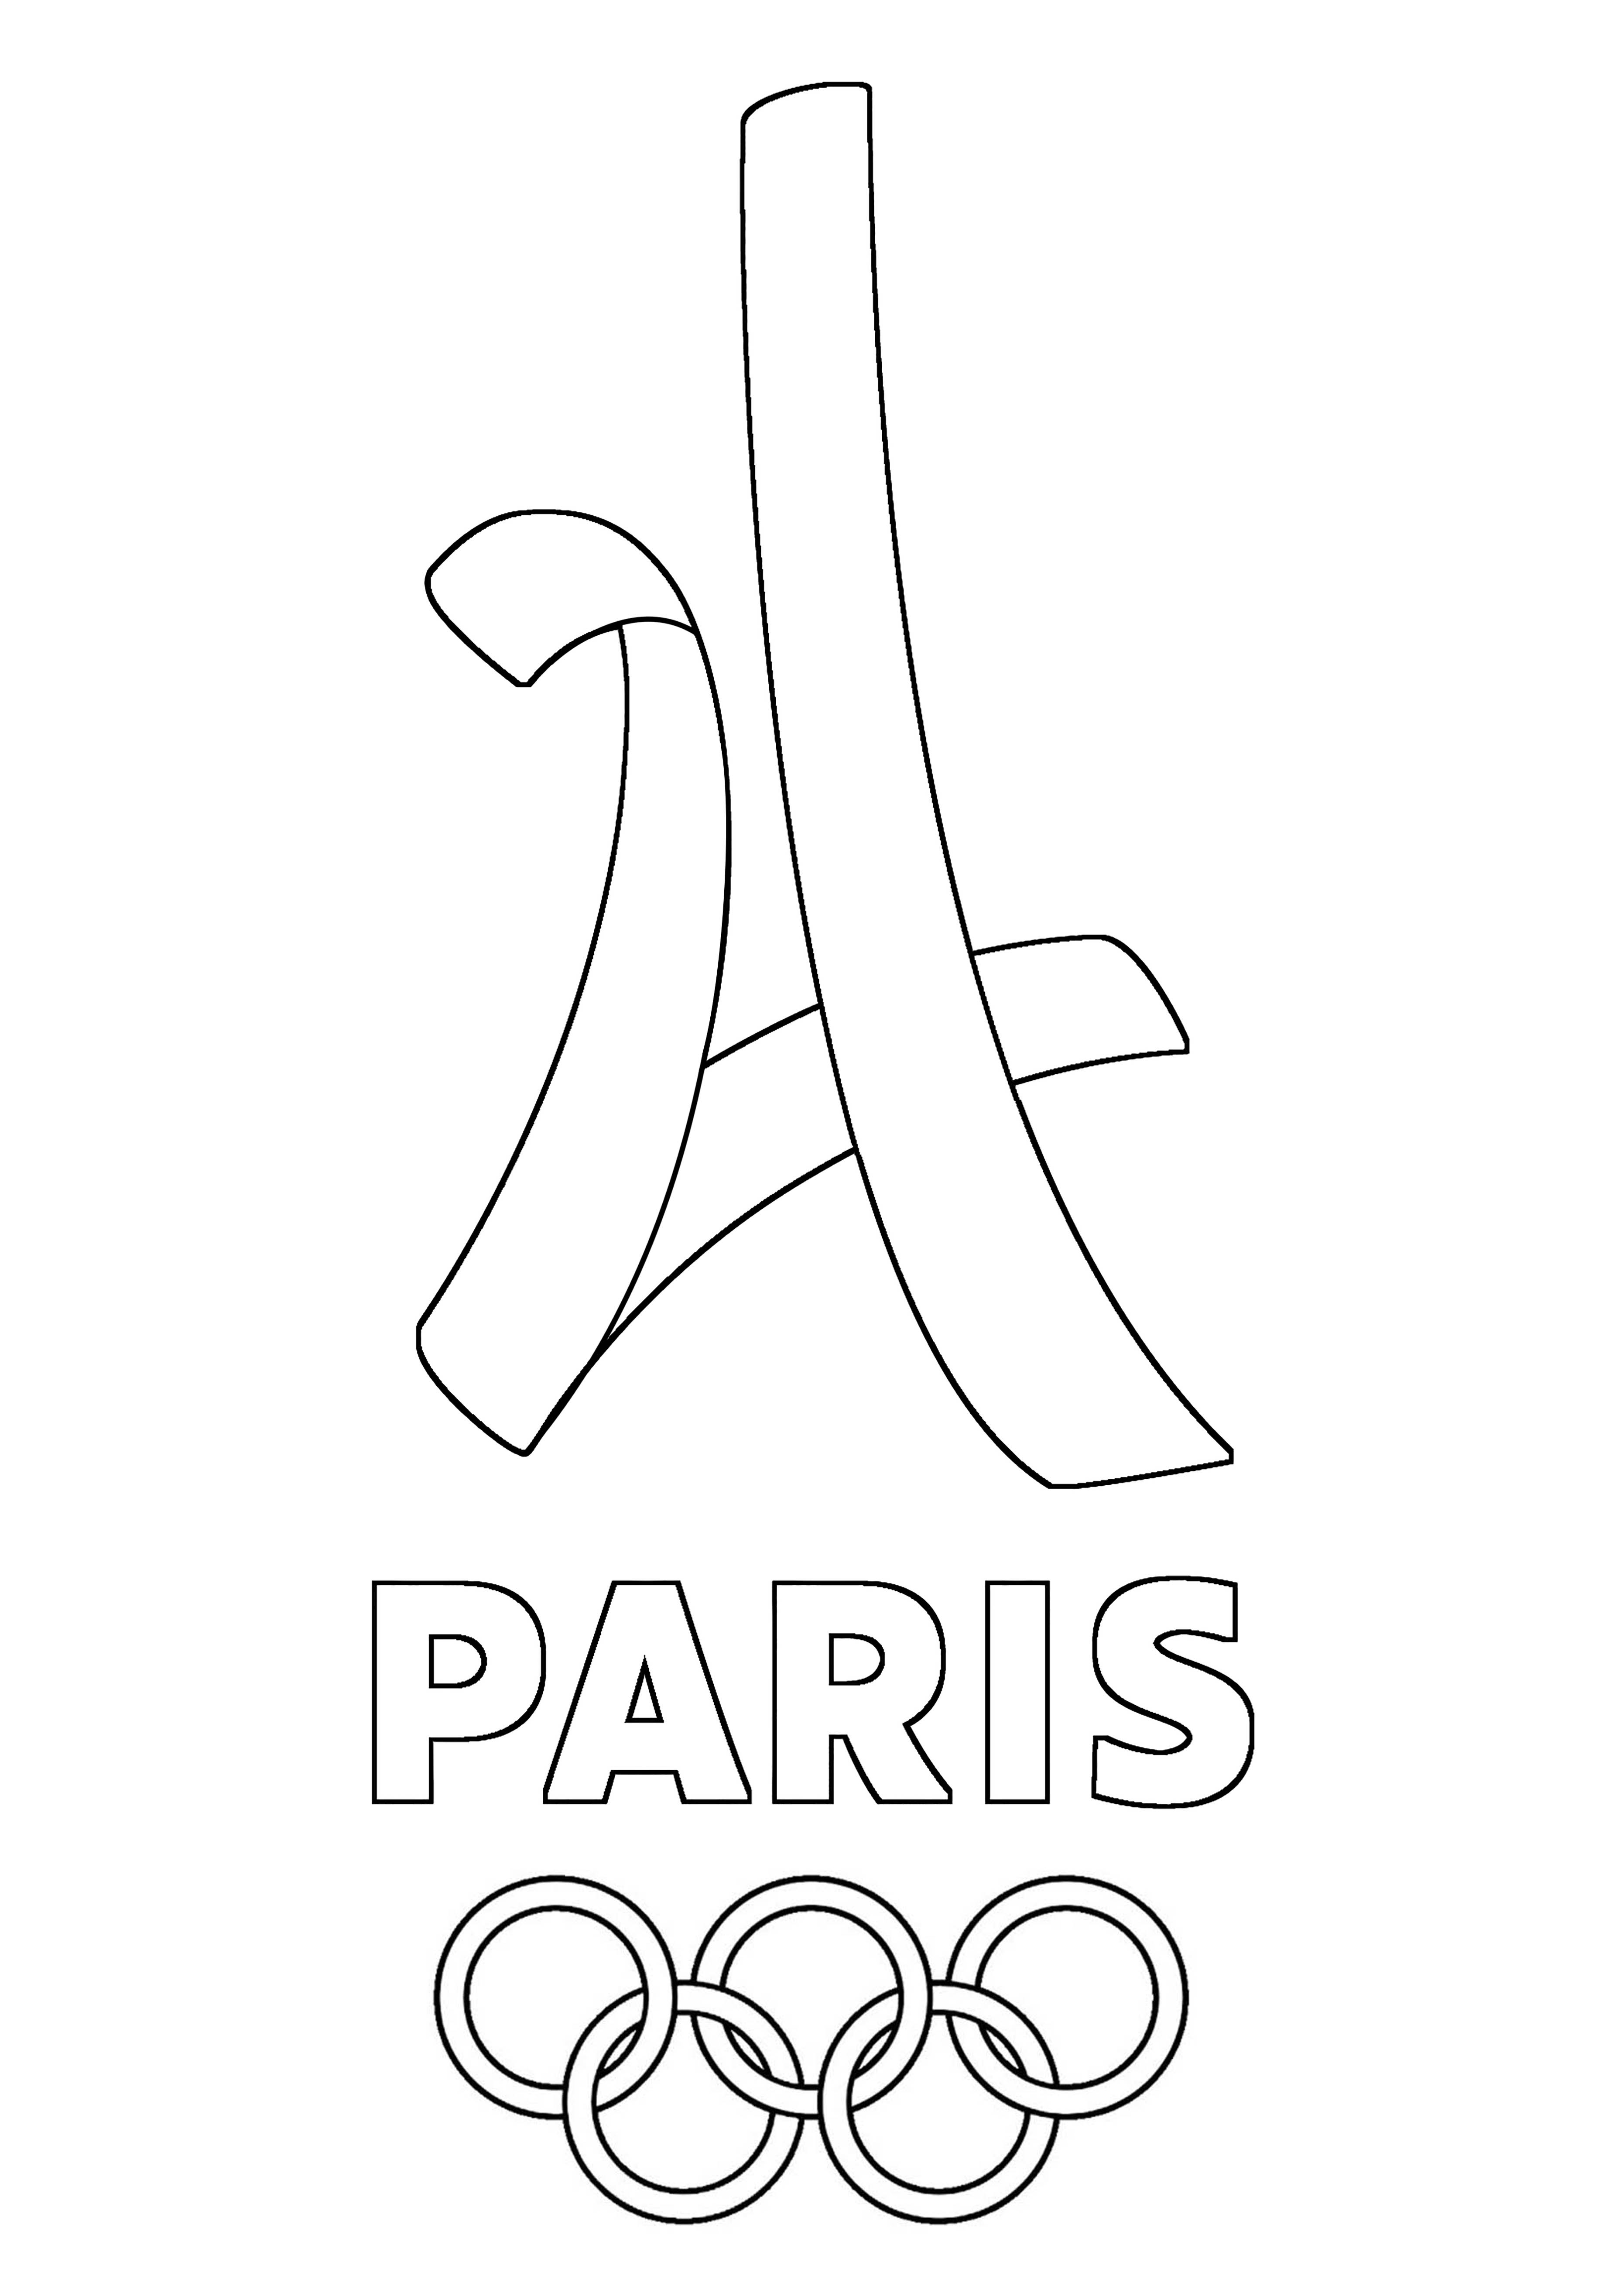 Logo paris 2024 olympic games - Olympic (and sport) Adult Coloring Pages